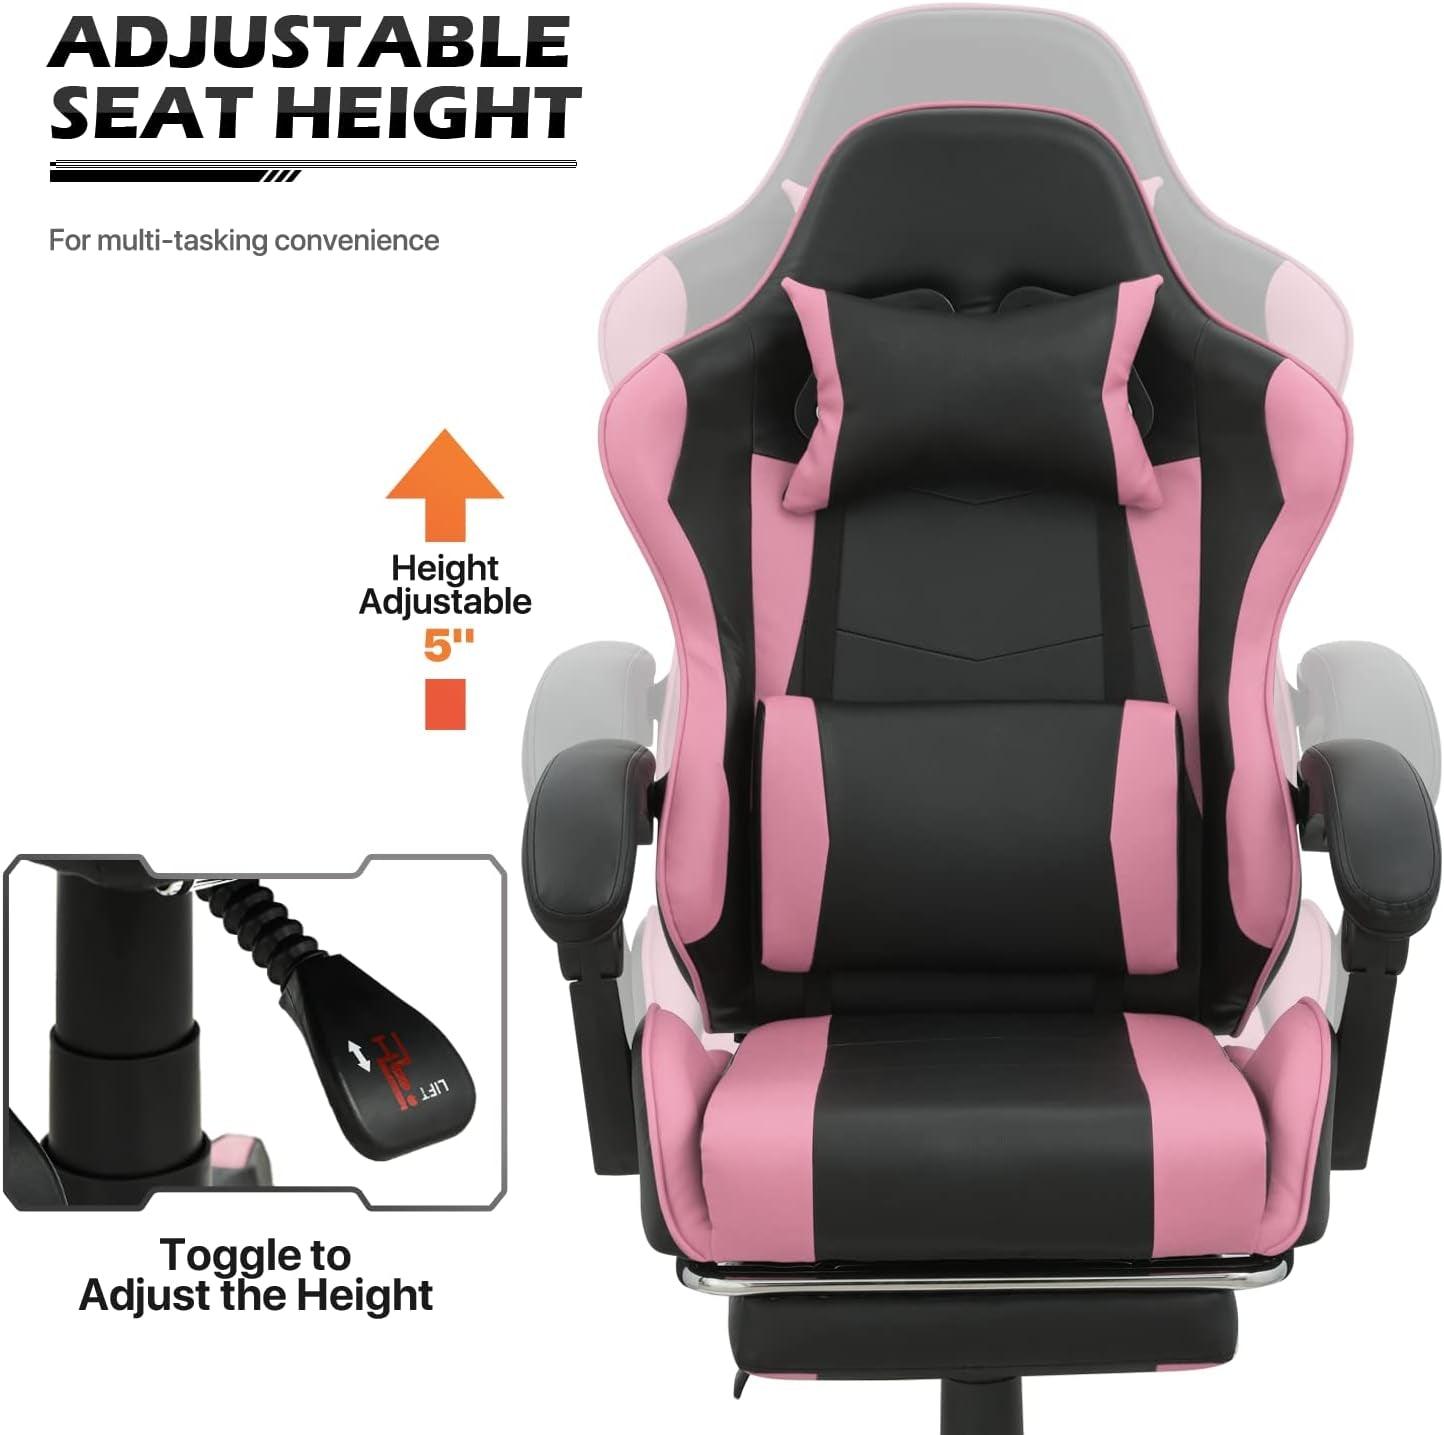 Monibloom Gaming Chair with Headrest & Lumbar Support Ergonomic Computer Racing Chair with Footrest, Adjustable Hight Leather Swivel Computer Chair for Adult Teen Office or Gaming, Pink